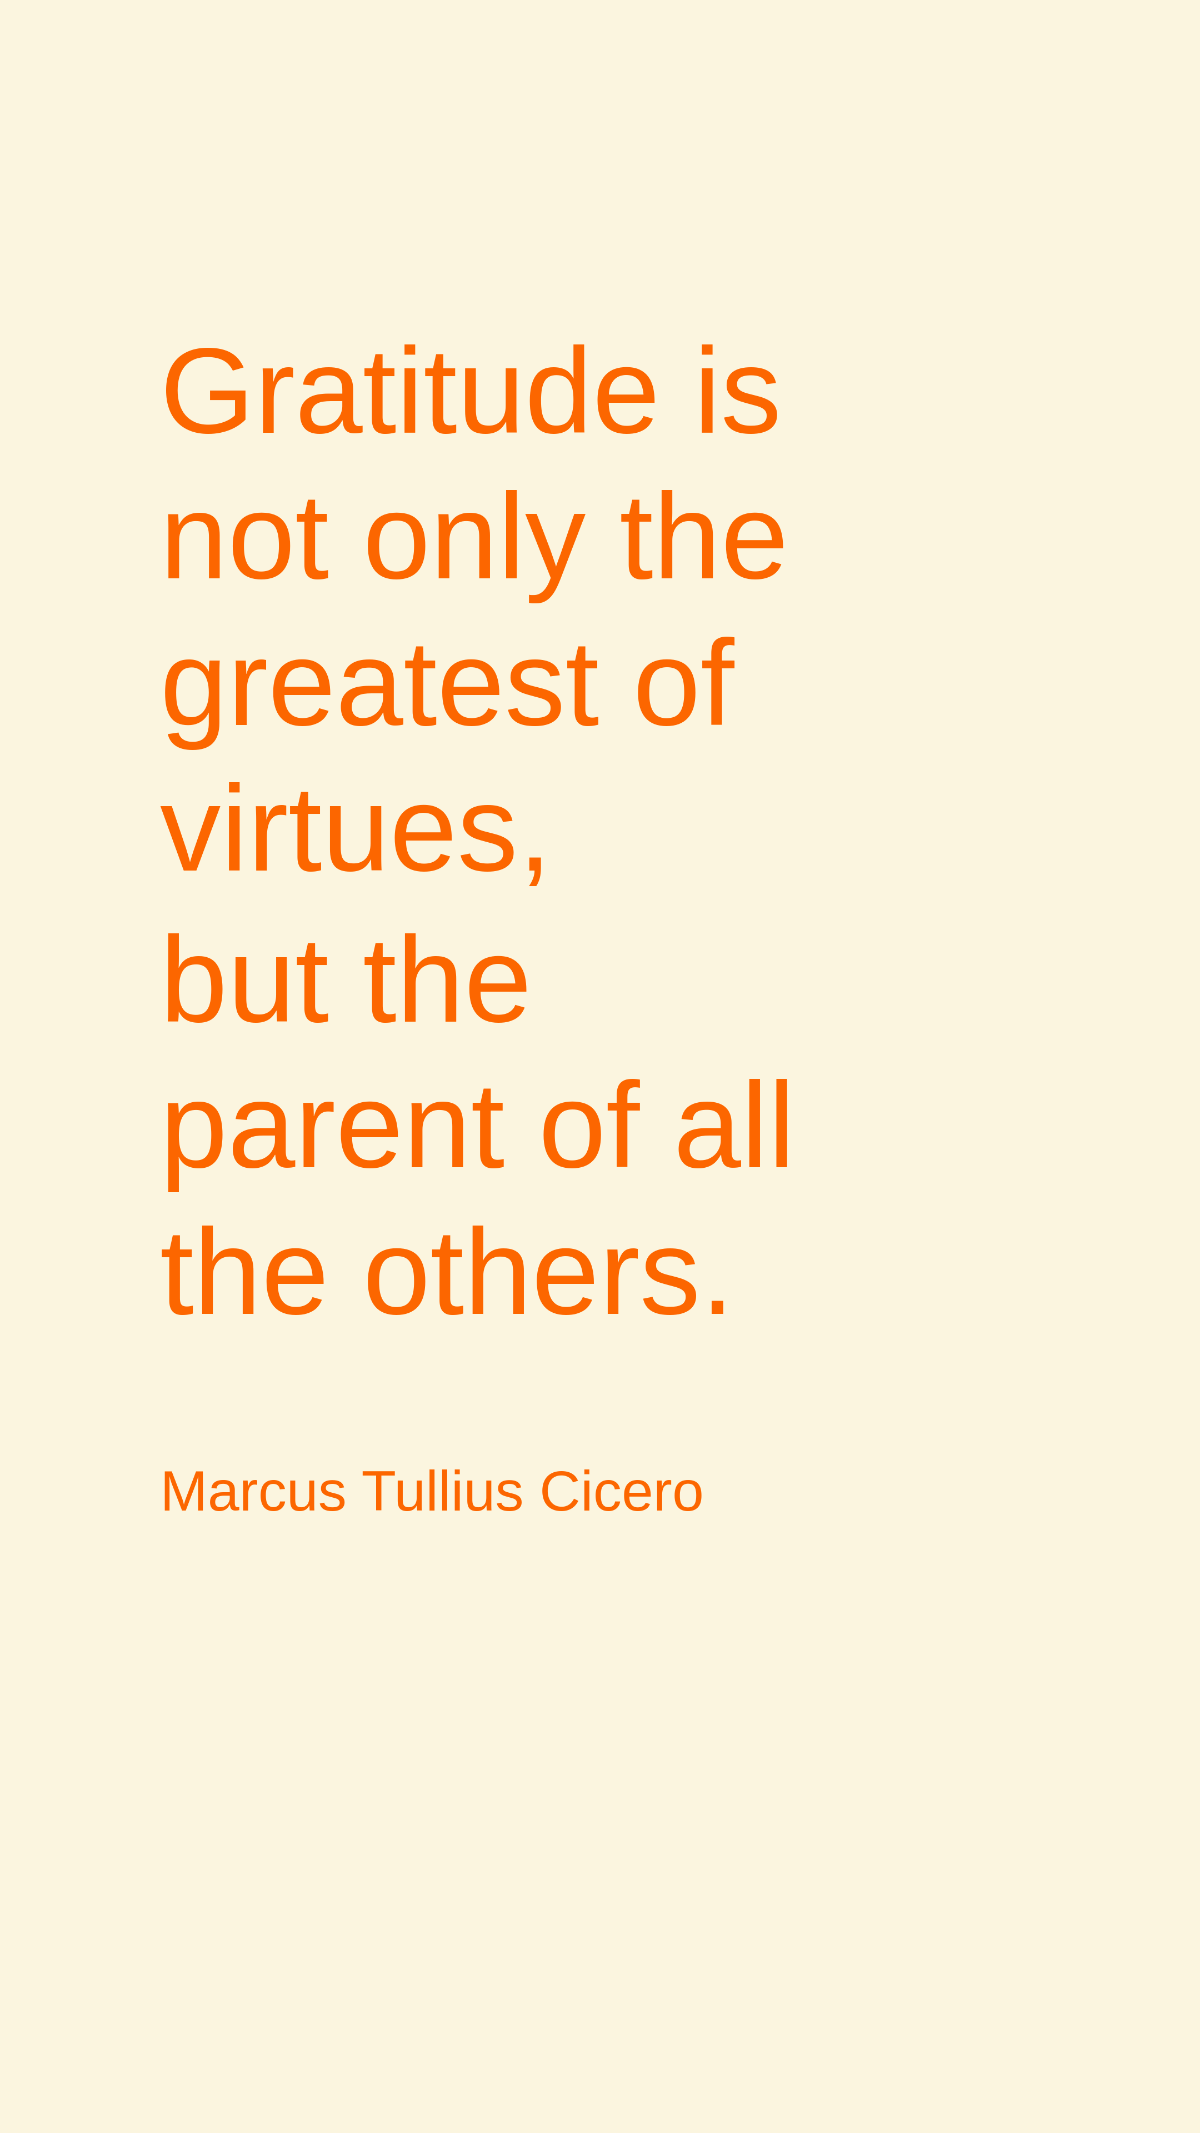 Marcus Tullius Cicero - Gratitude is not only the greatest of virtues, but the parent of all the others.